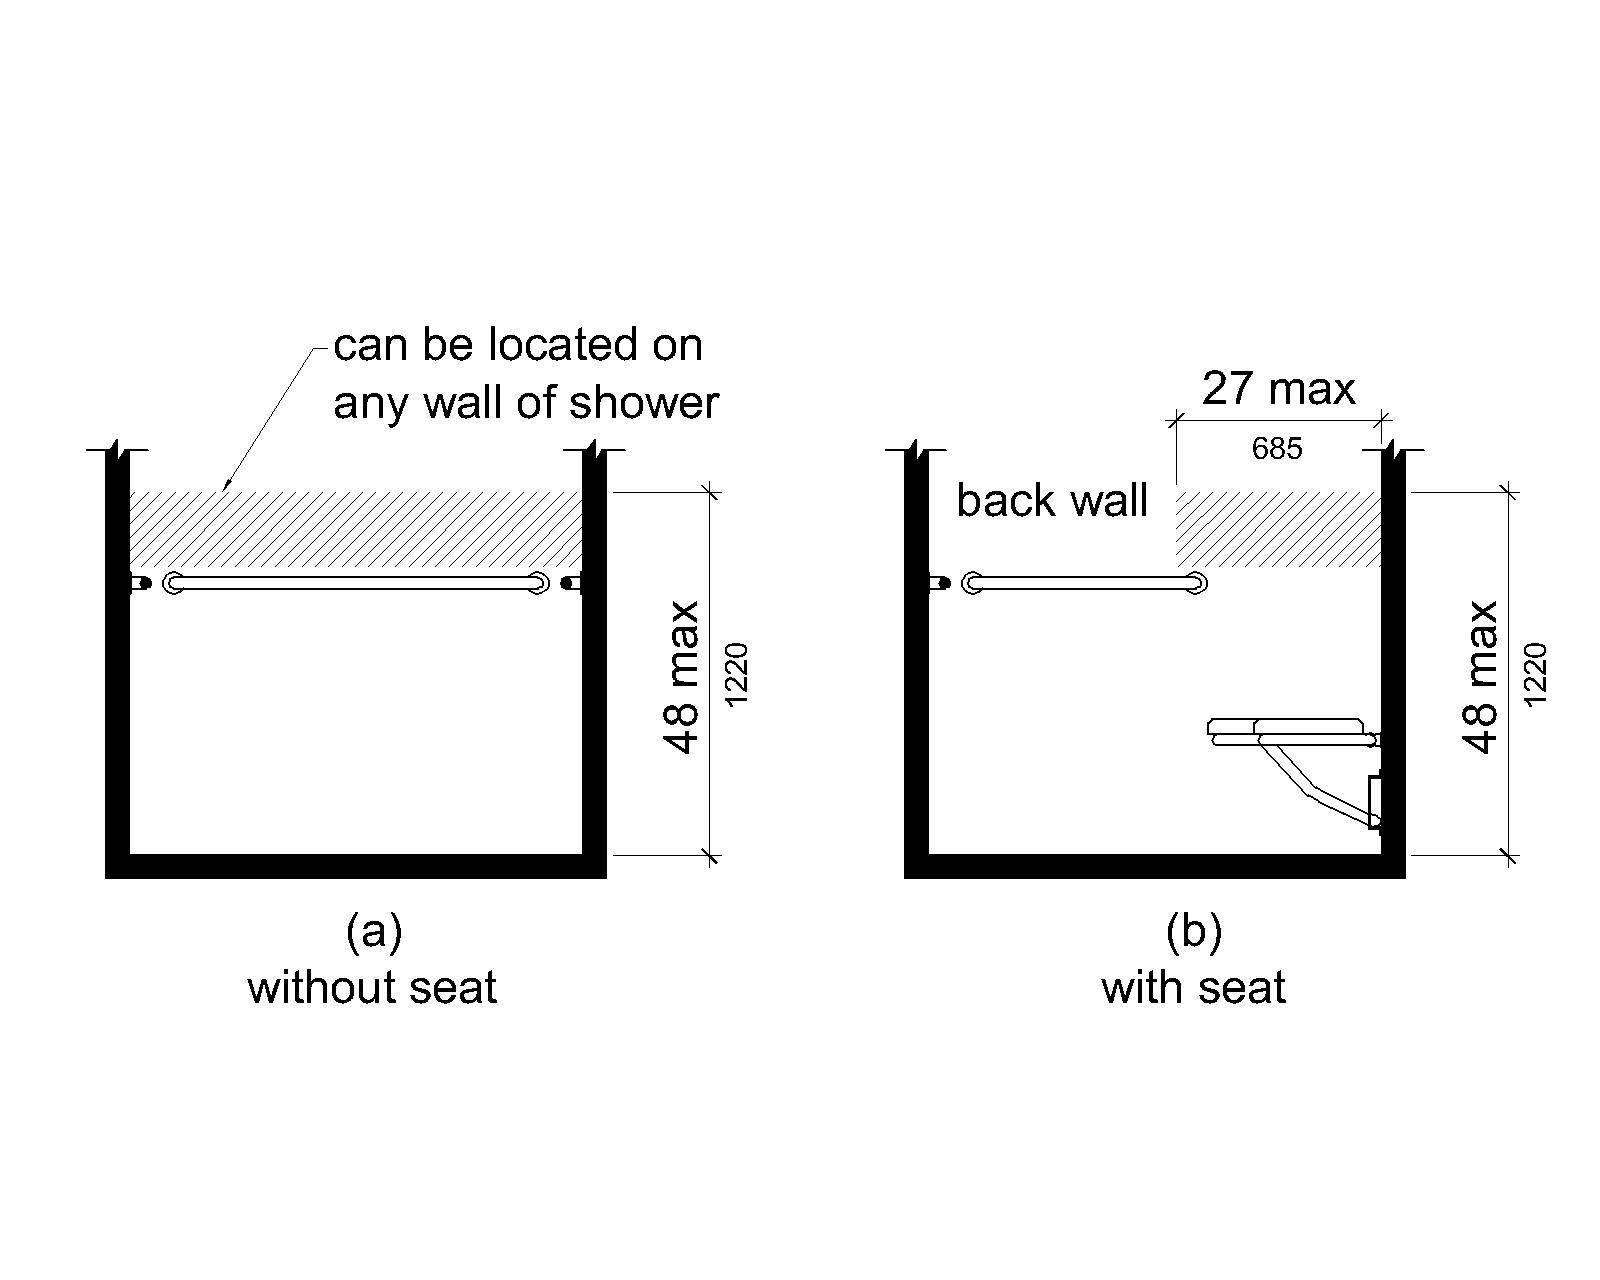 Figure (a) is an elevation drawing of a compartment without a seat. The area for controls, faucets and shower spray units is located on any wall of the shower above the grab bar but no higher than 48 inches (1220 mm) above the shower deck surface. Figure (b) is an elevation drawing of a compartment with a seat. The area for controls, faucets and shower spray units is located on the back wall 27 inches (685 mm) from the seat wall and above the grab bar, but no higher than 48 inches (1220 mm) above the shower deck surface.